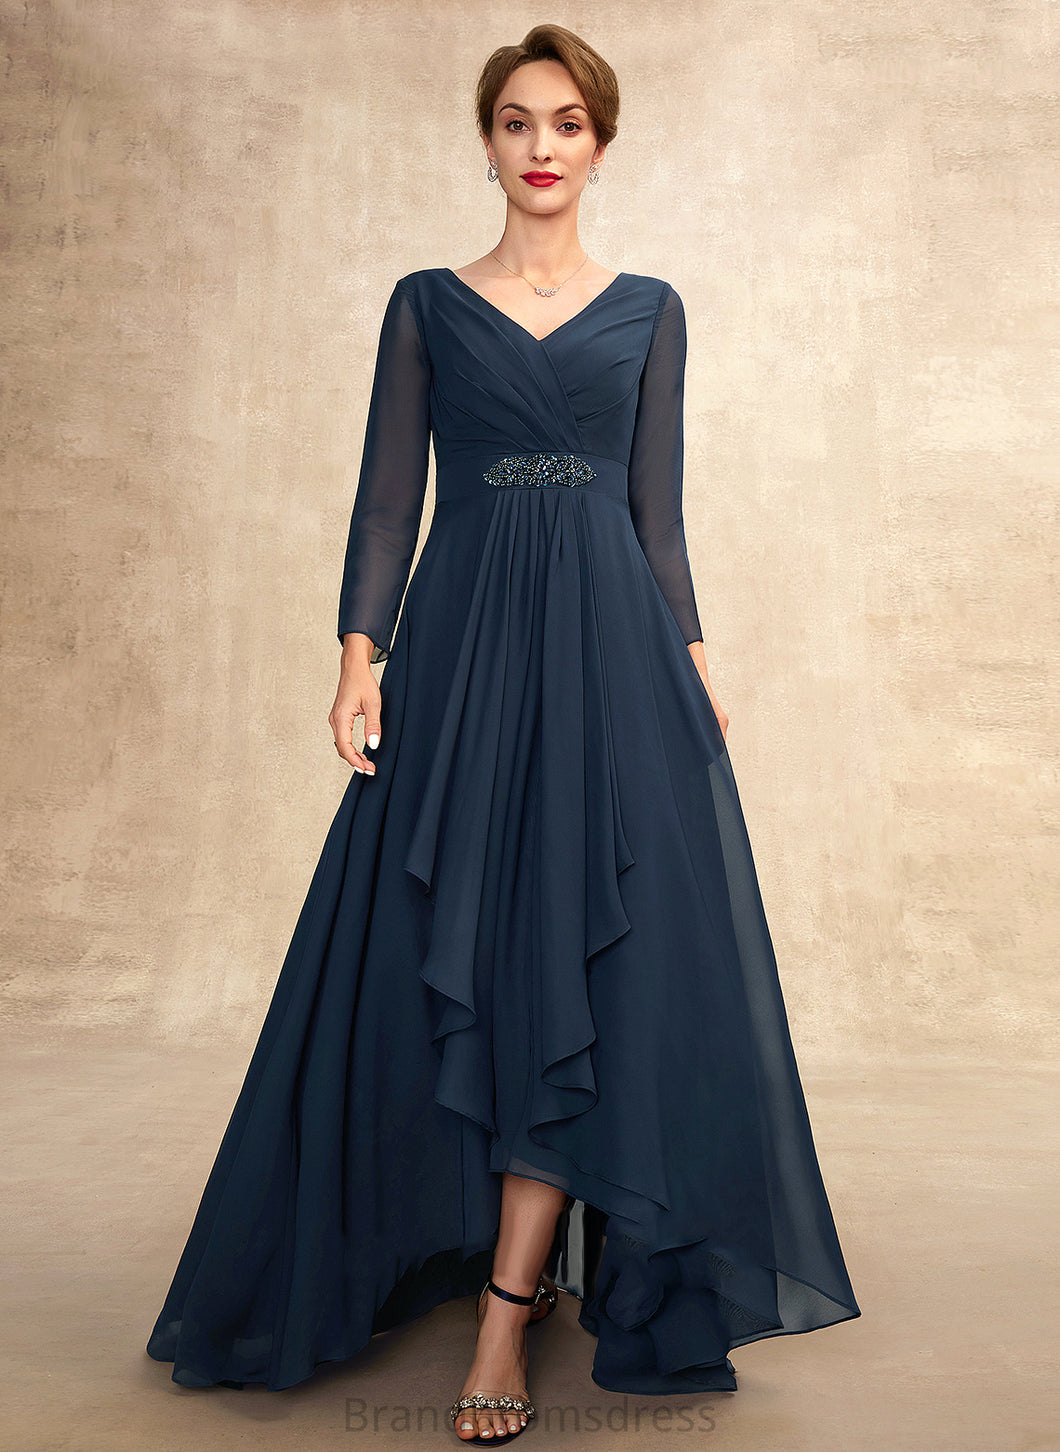 With the Bow(s) Dress Asymmetrical of Bride Mother of the Bride Dresses Chiffon Mother A-Line Beading Alani Ruffle V-neck